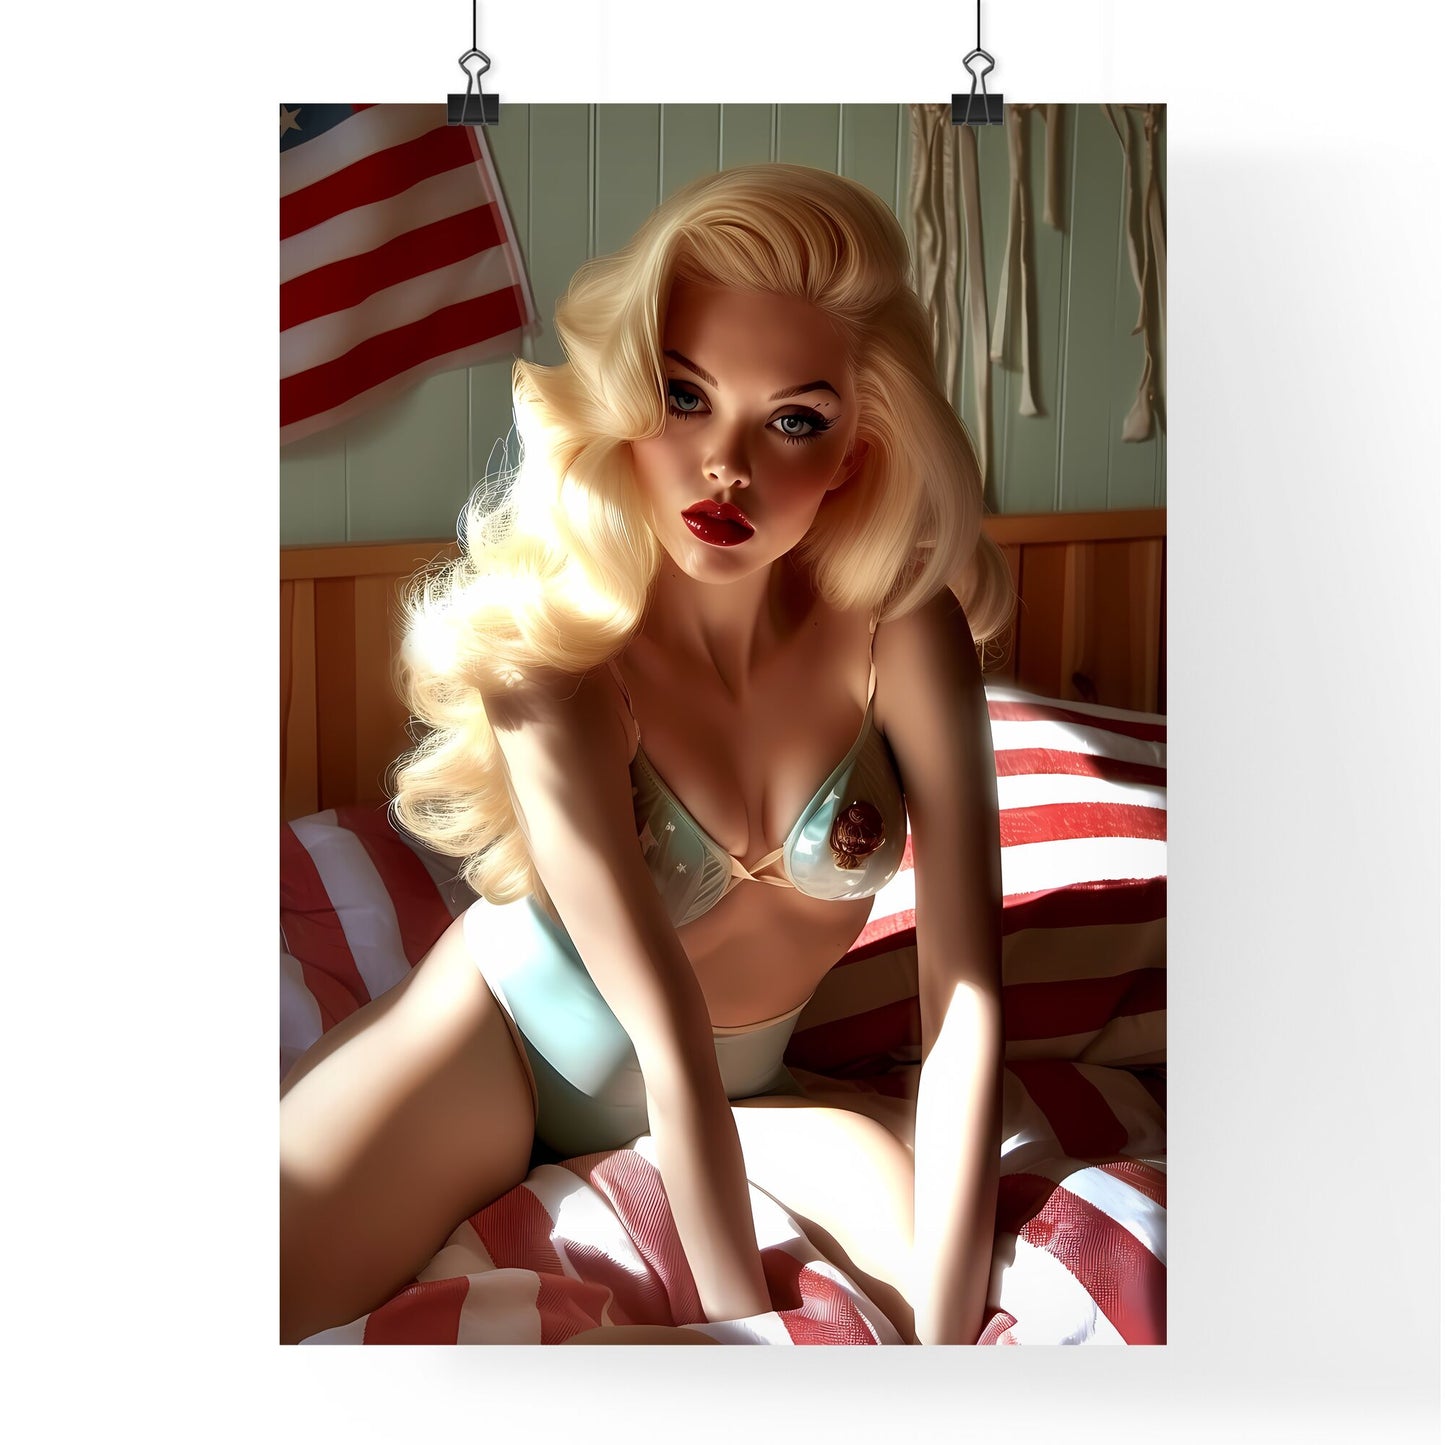 Pin up style, beautiful composition, dramatic pose - Art print of a woman in a garment sitting on a bed Default Title